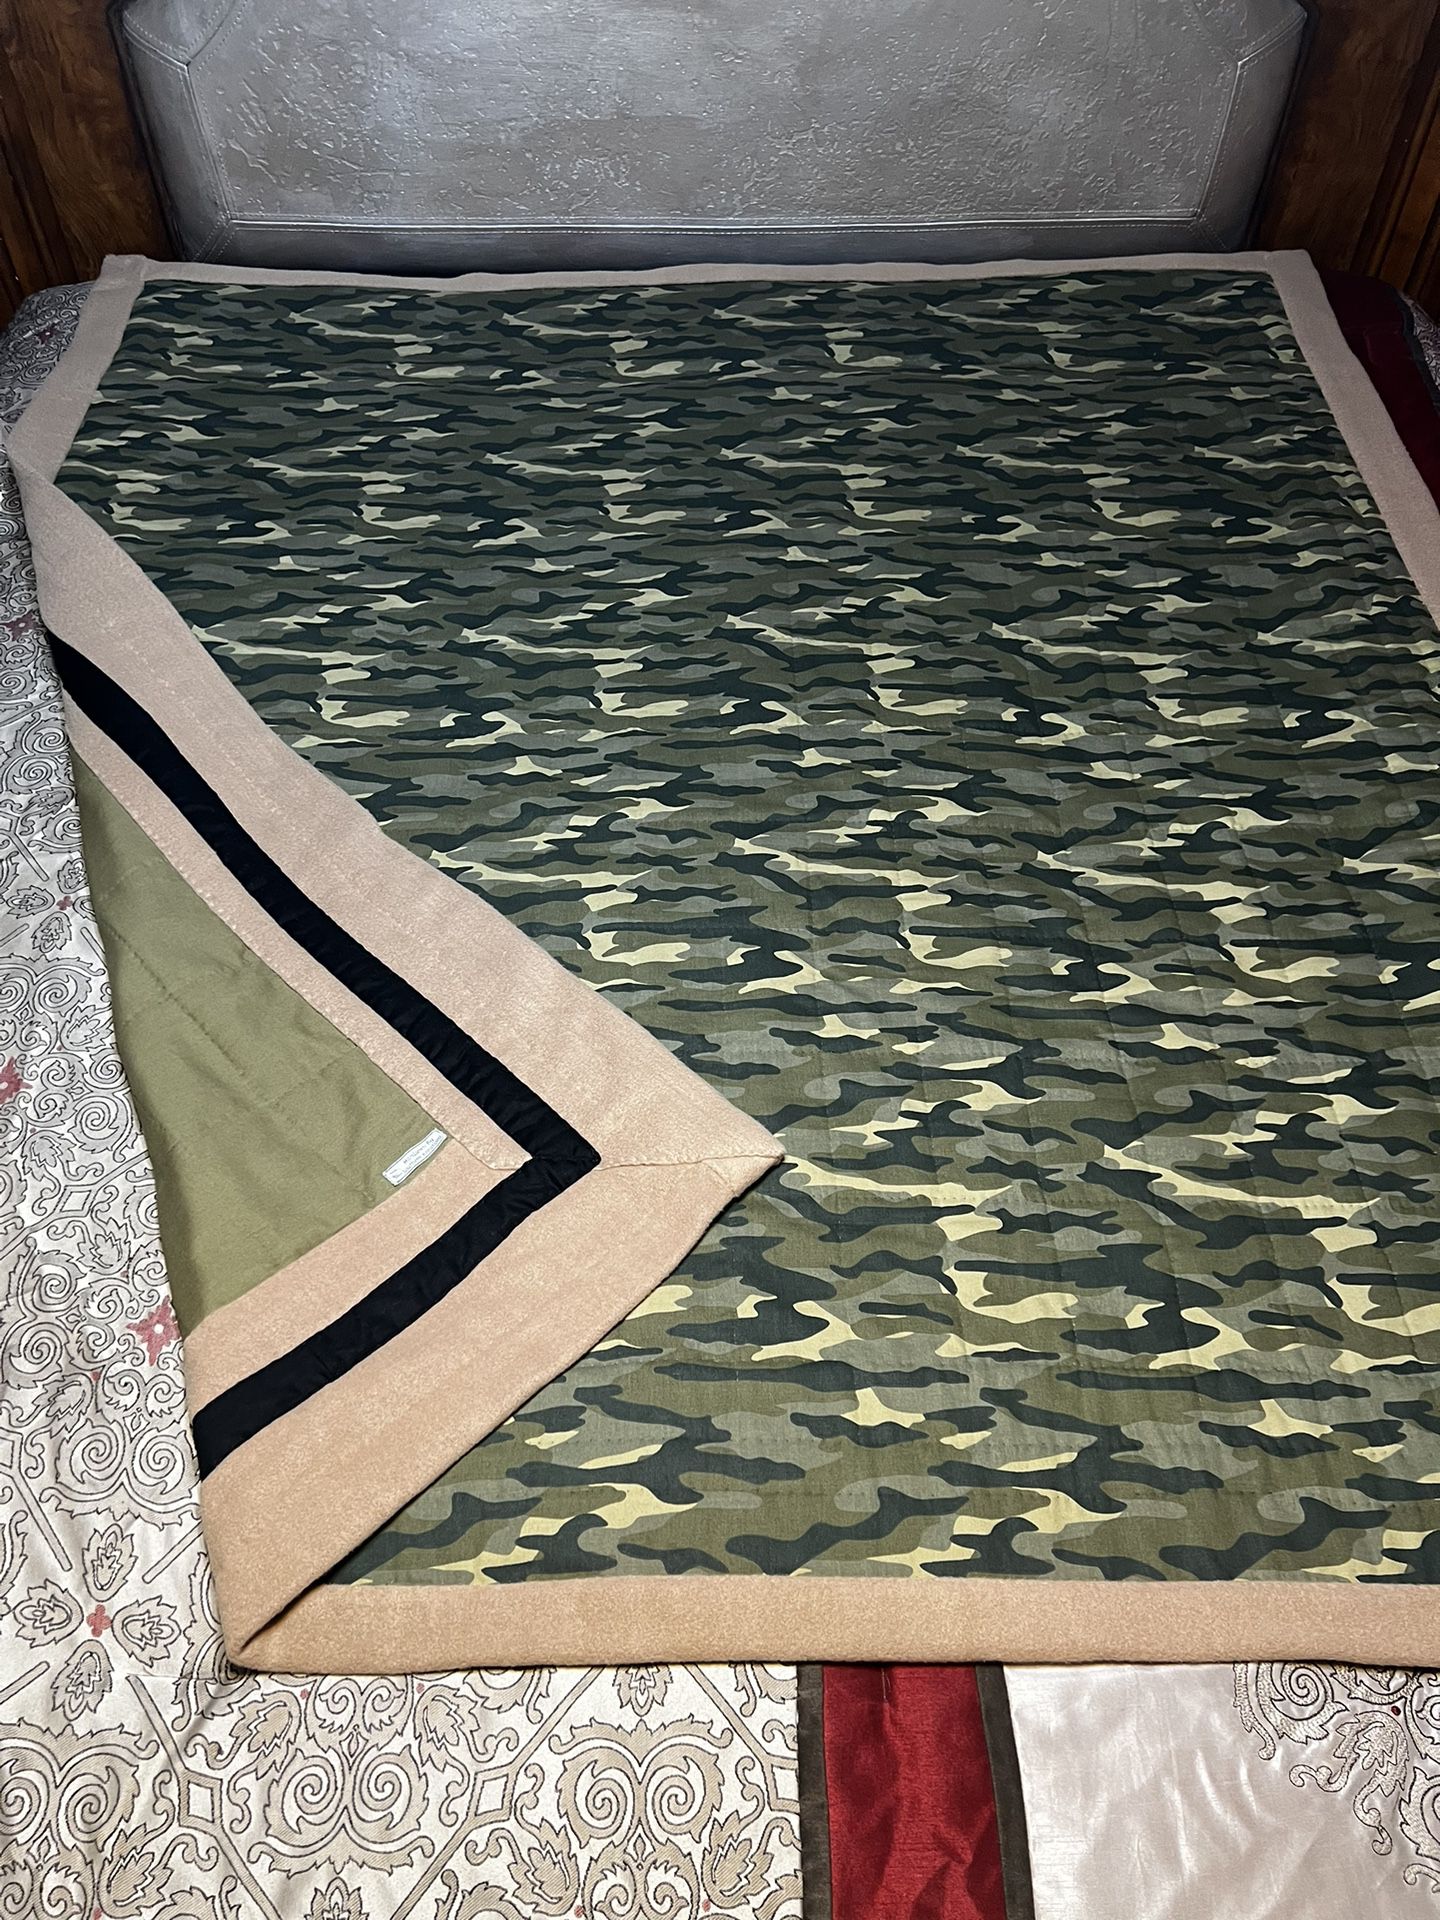 Camouflage Camp Site Throw Size Quilt   Heavy Duty   62 X 68 Inches 